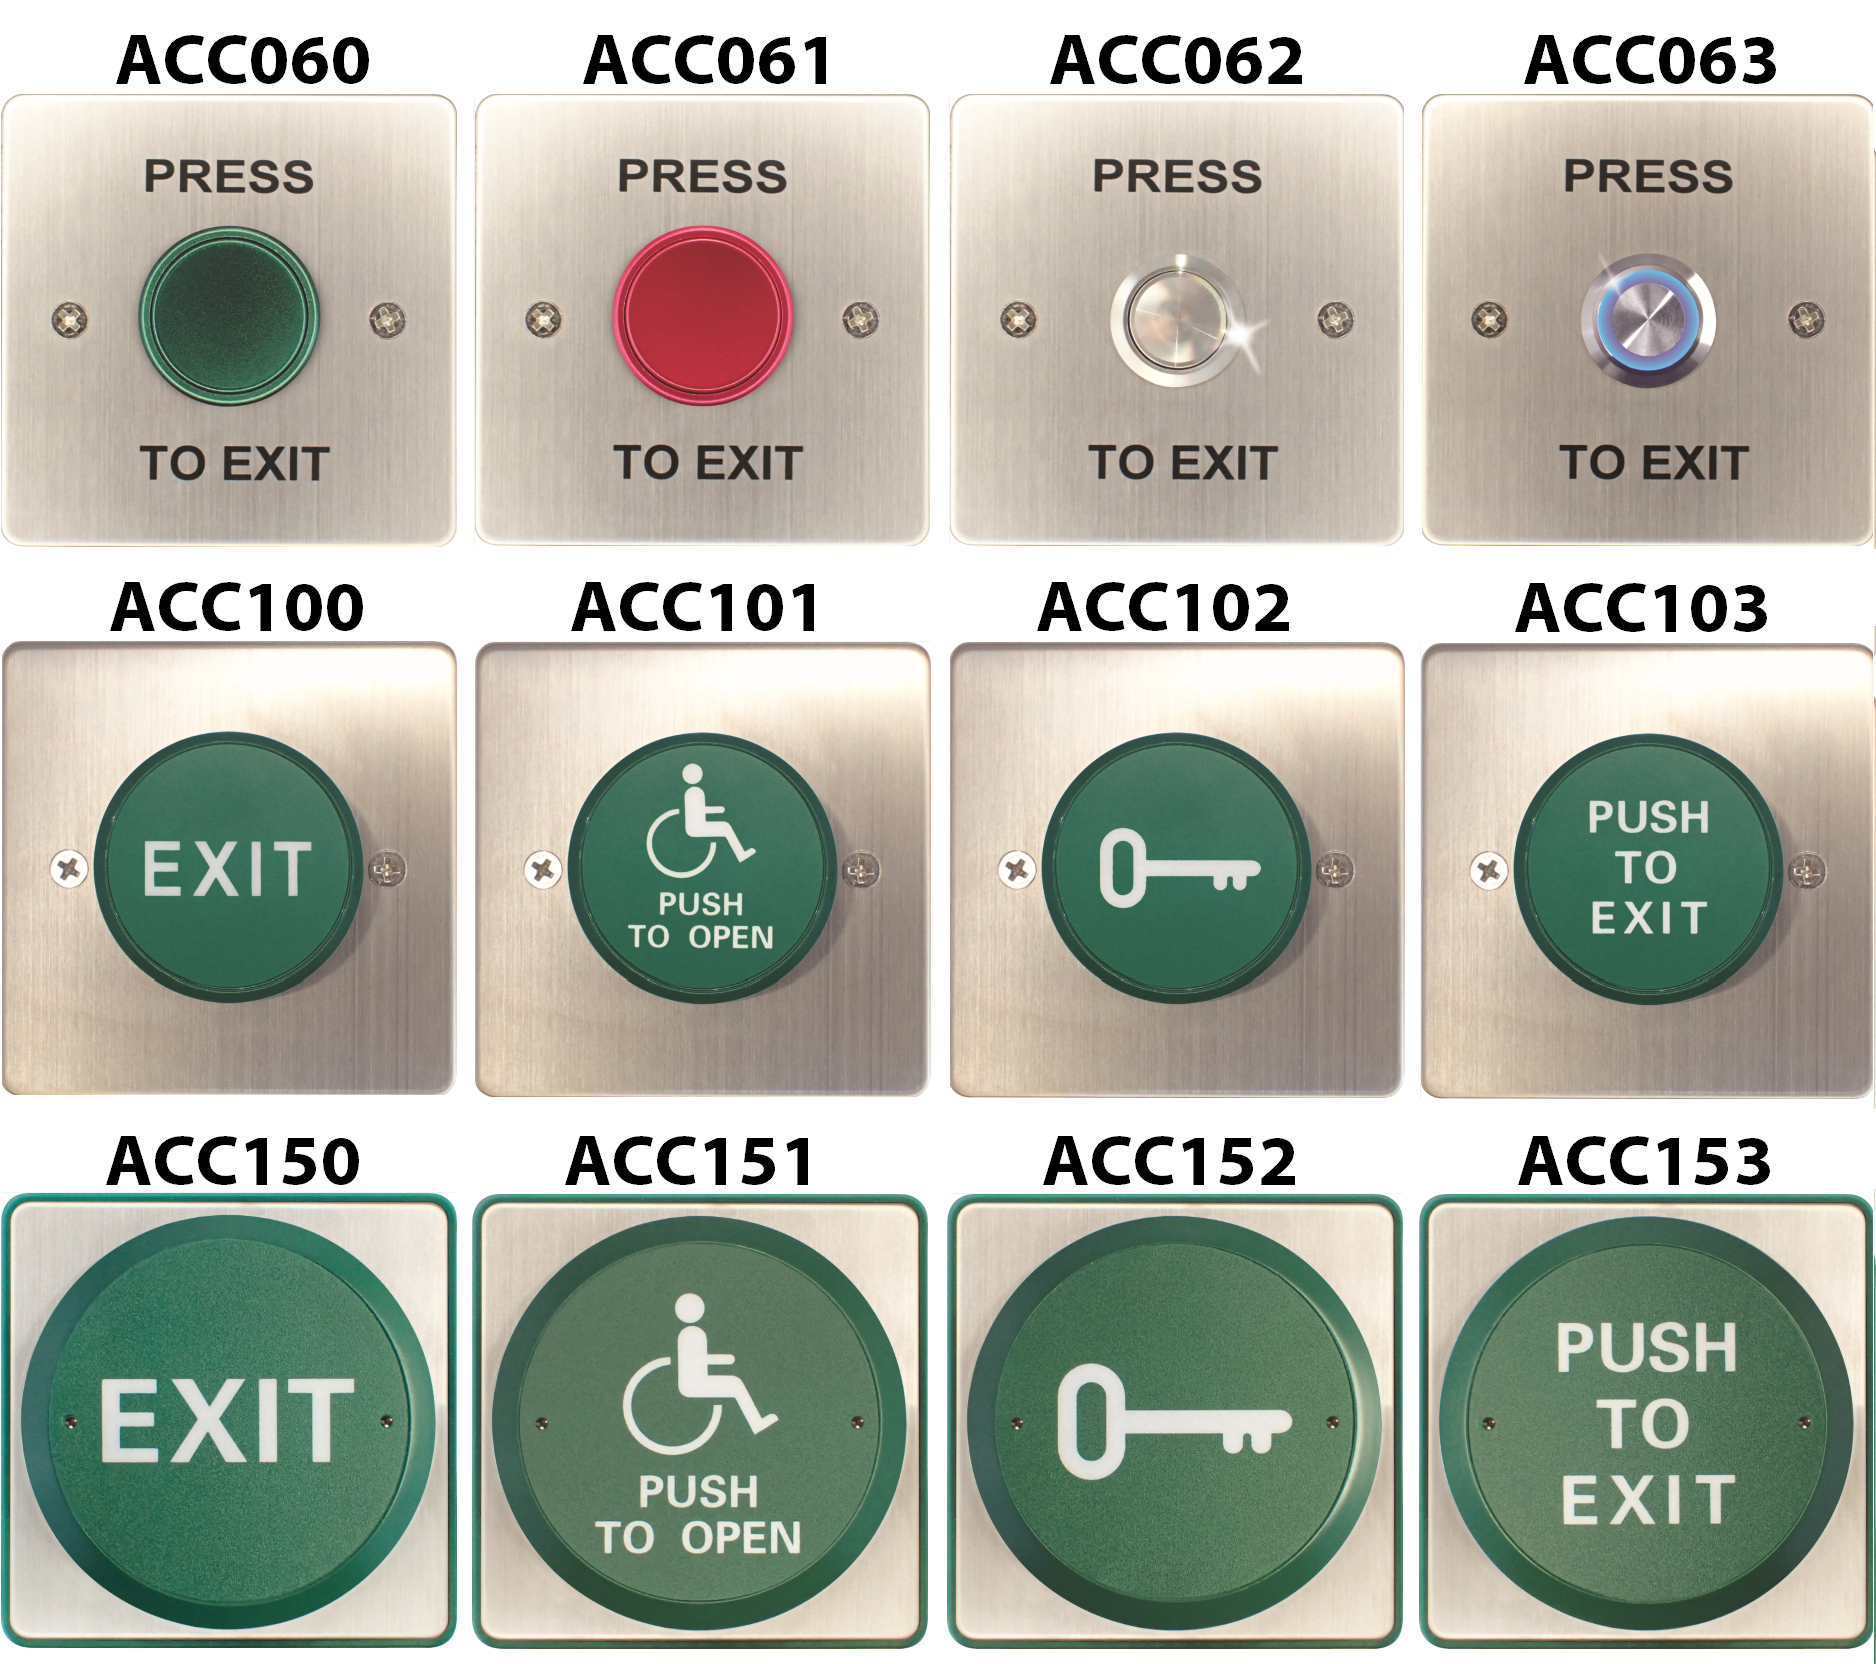 Press To Exit Buttons& NAMES